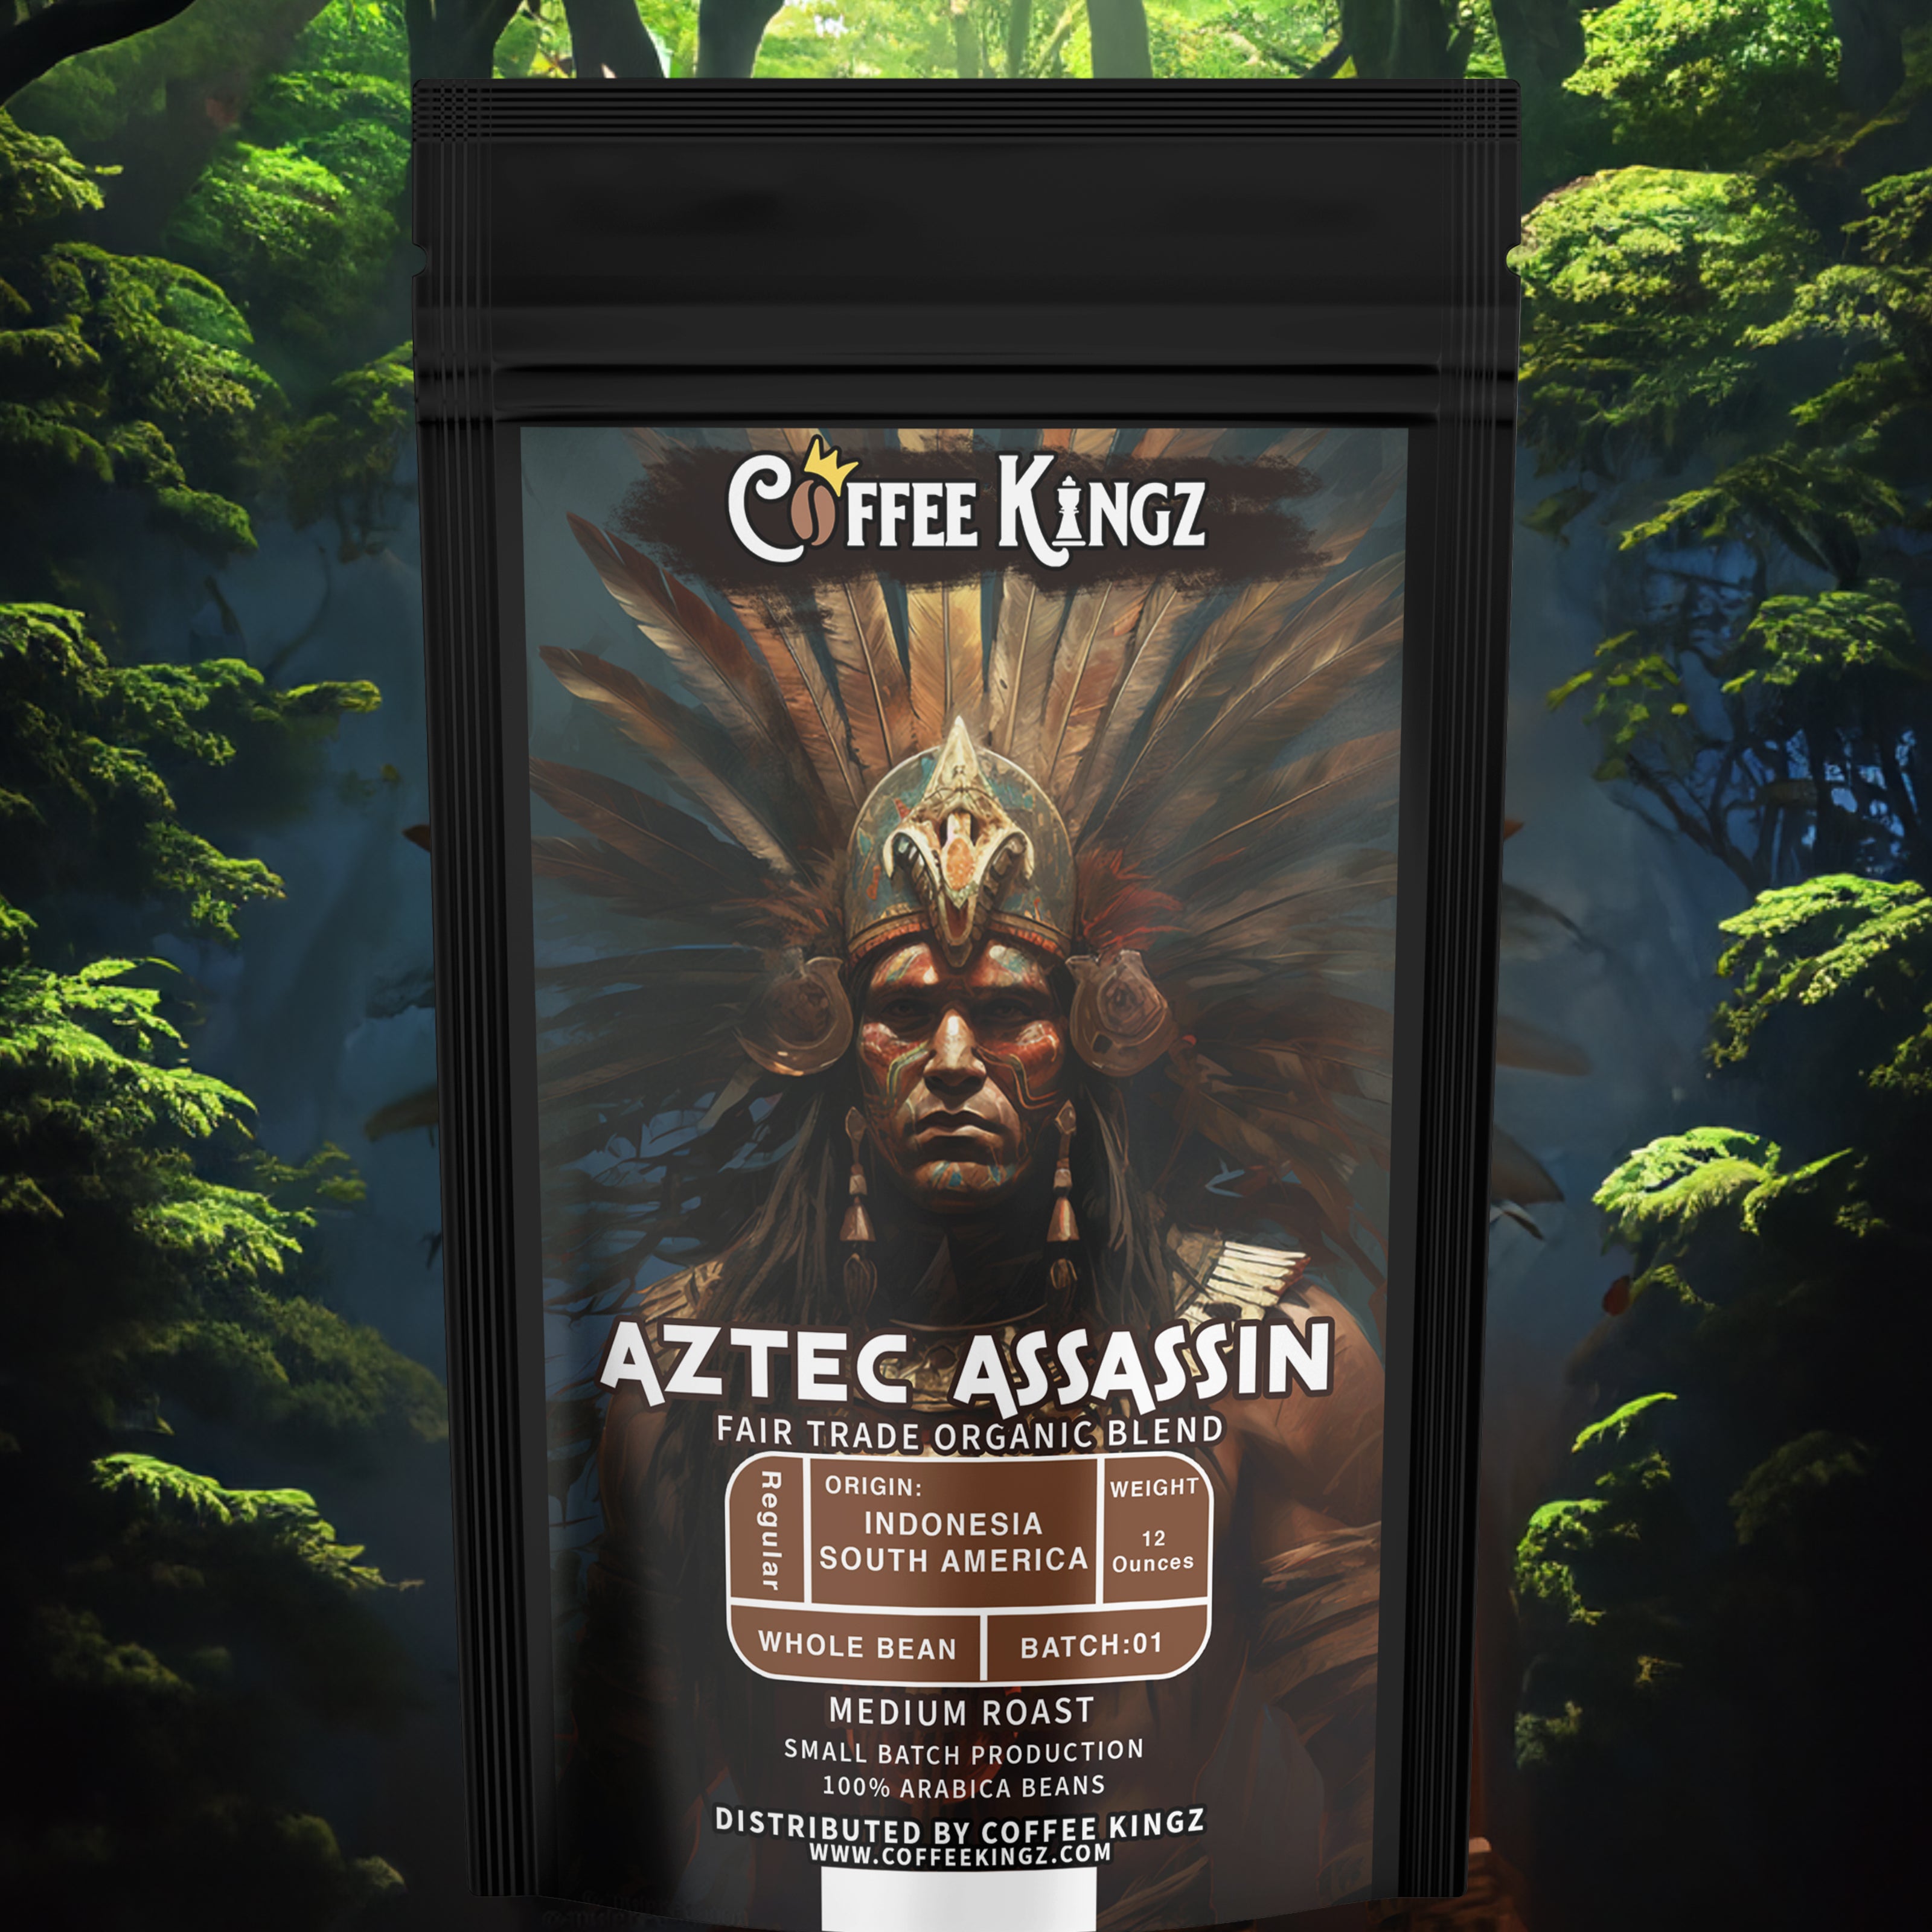 Bold and mystical - savor the rich tradition with Coffee Kingz's Aztec Assassin, a fair trade organic blend from South America.